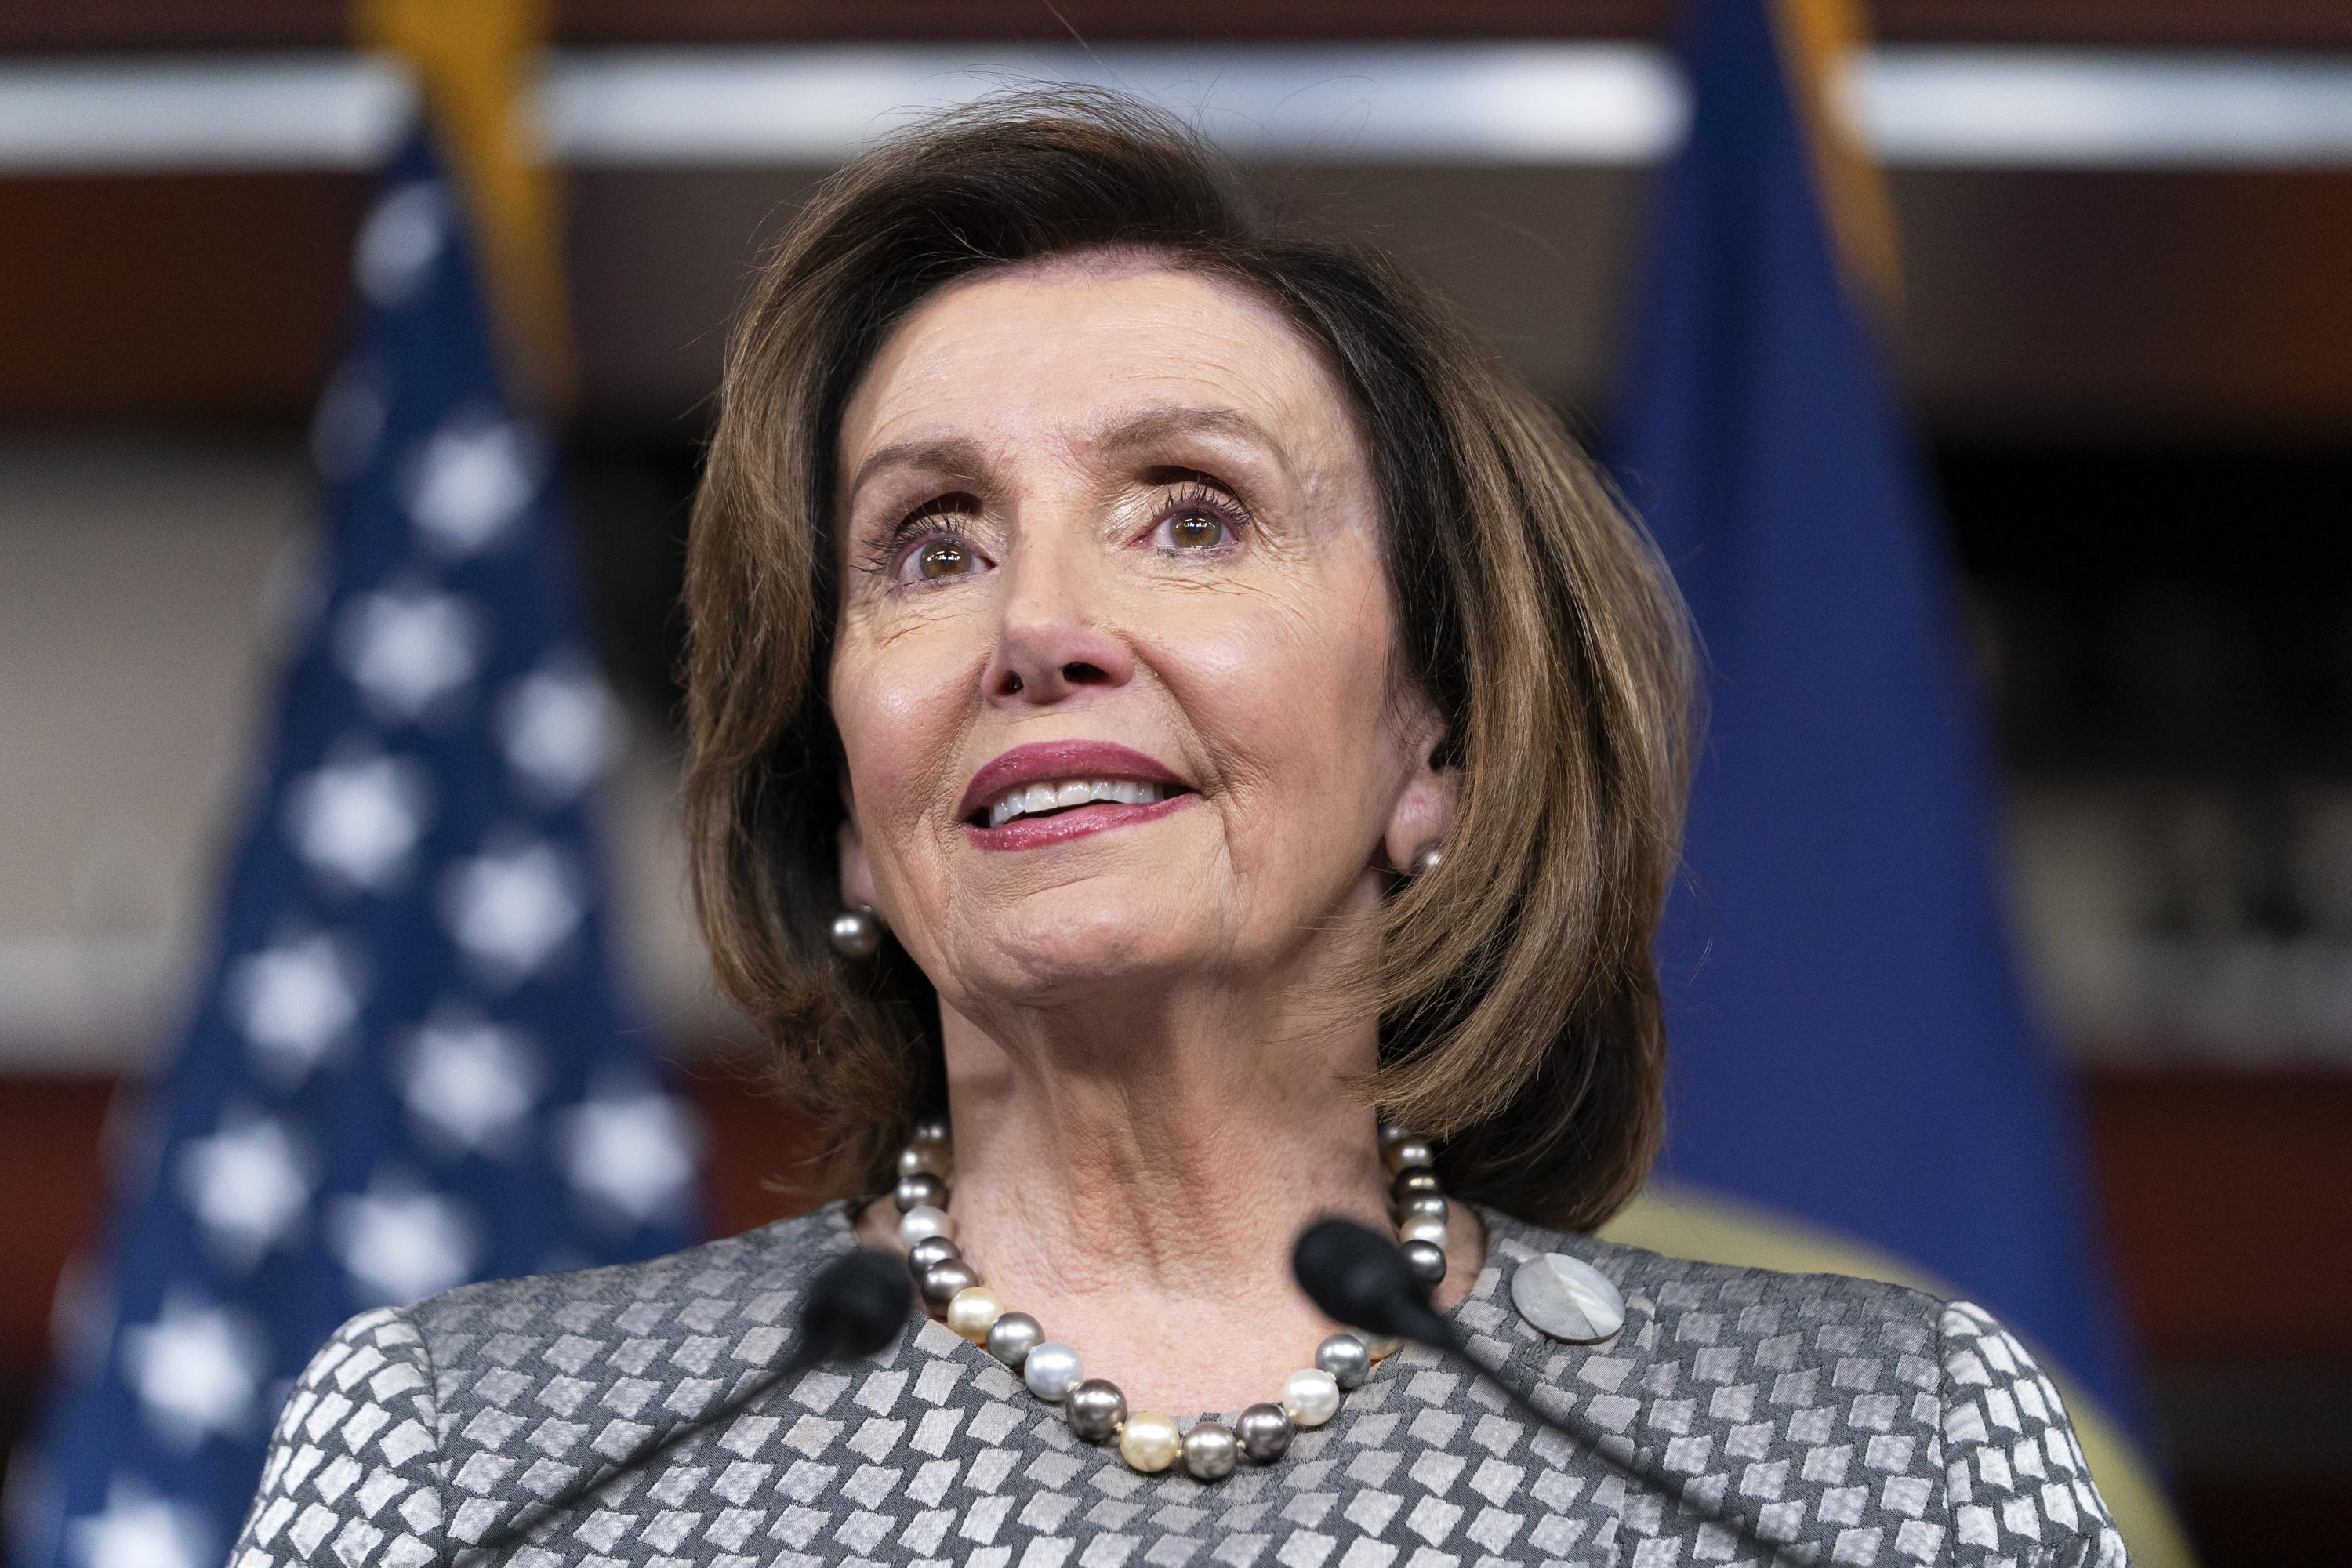 Pelosi sets $45,000 minimum yearly salary for House aides